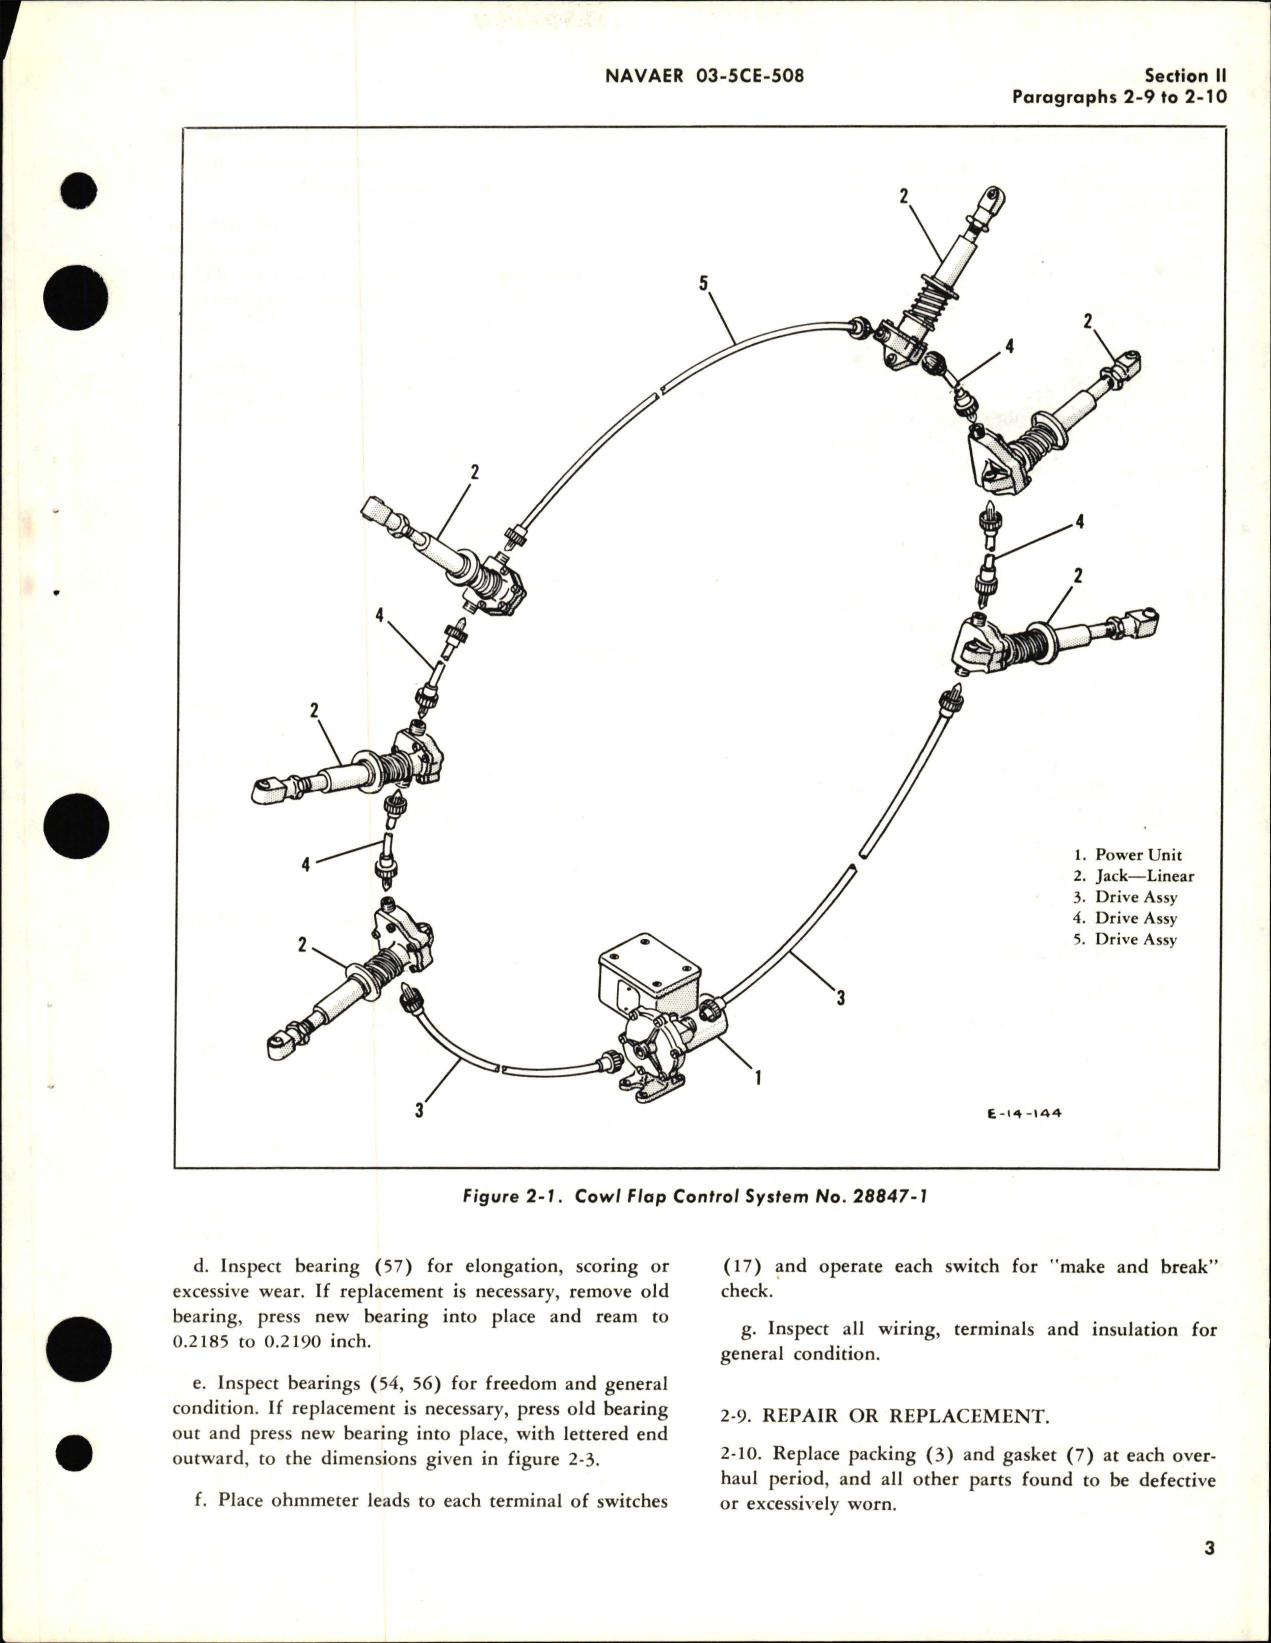 Sample page 7 from AirCorps Library document: Overhaul Instructions for Cowl Flap Control System - Part 28847-1